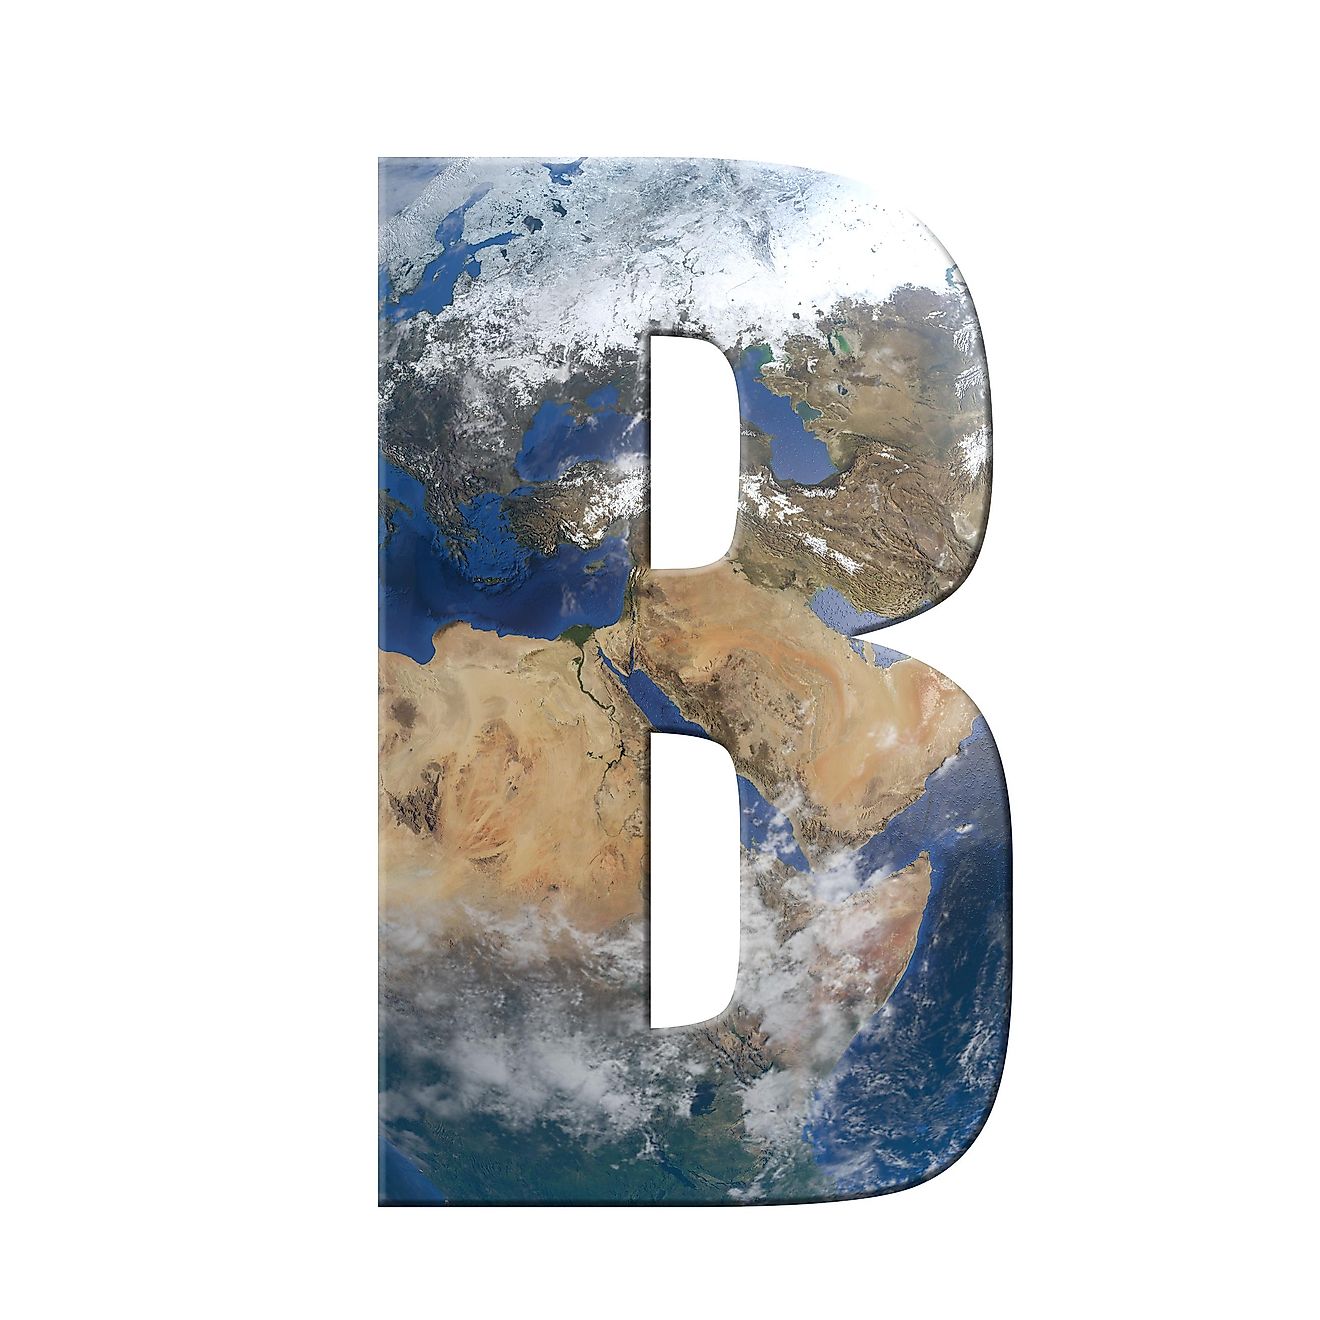 The Letter "B" decorated in the features of Planet Earth.